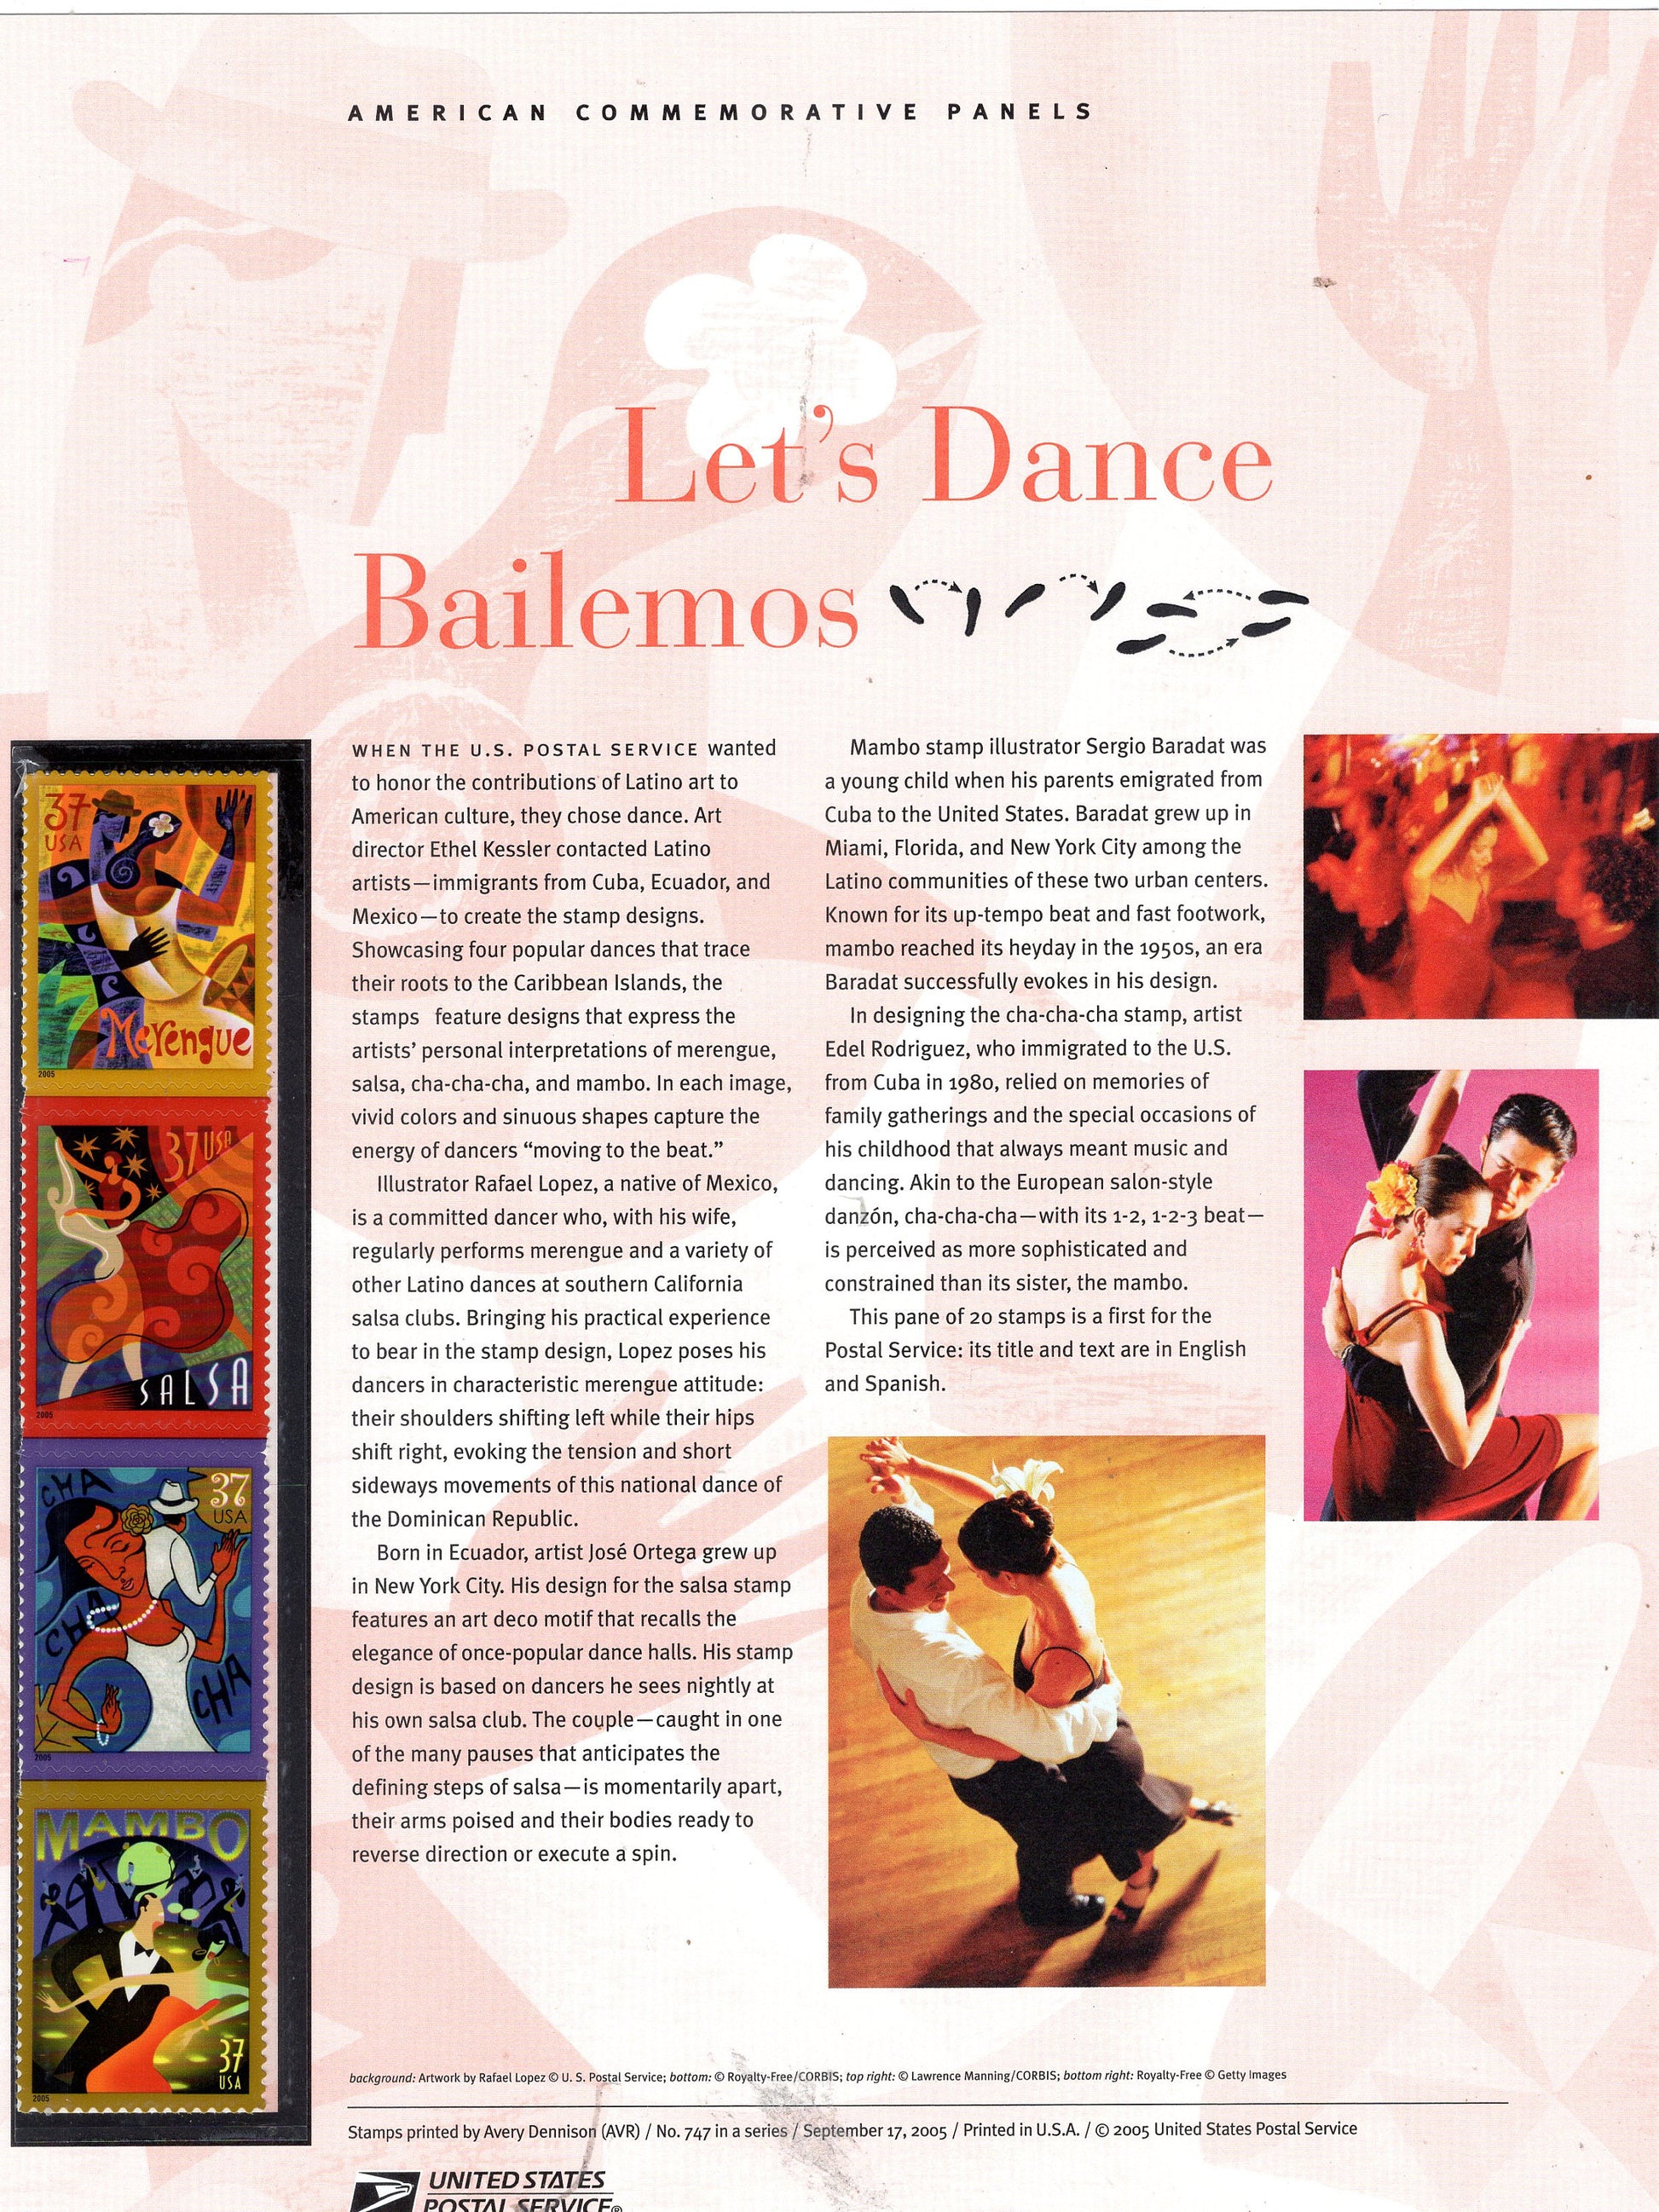 LATIN DANCE MUSIC Culture Commemorative Panel with a Block of 4 Stamps Illustrations plus Text – A Great Gift 8.5x11 - Issued in 2005 - Stk# 747-